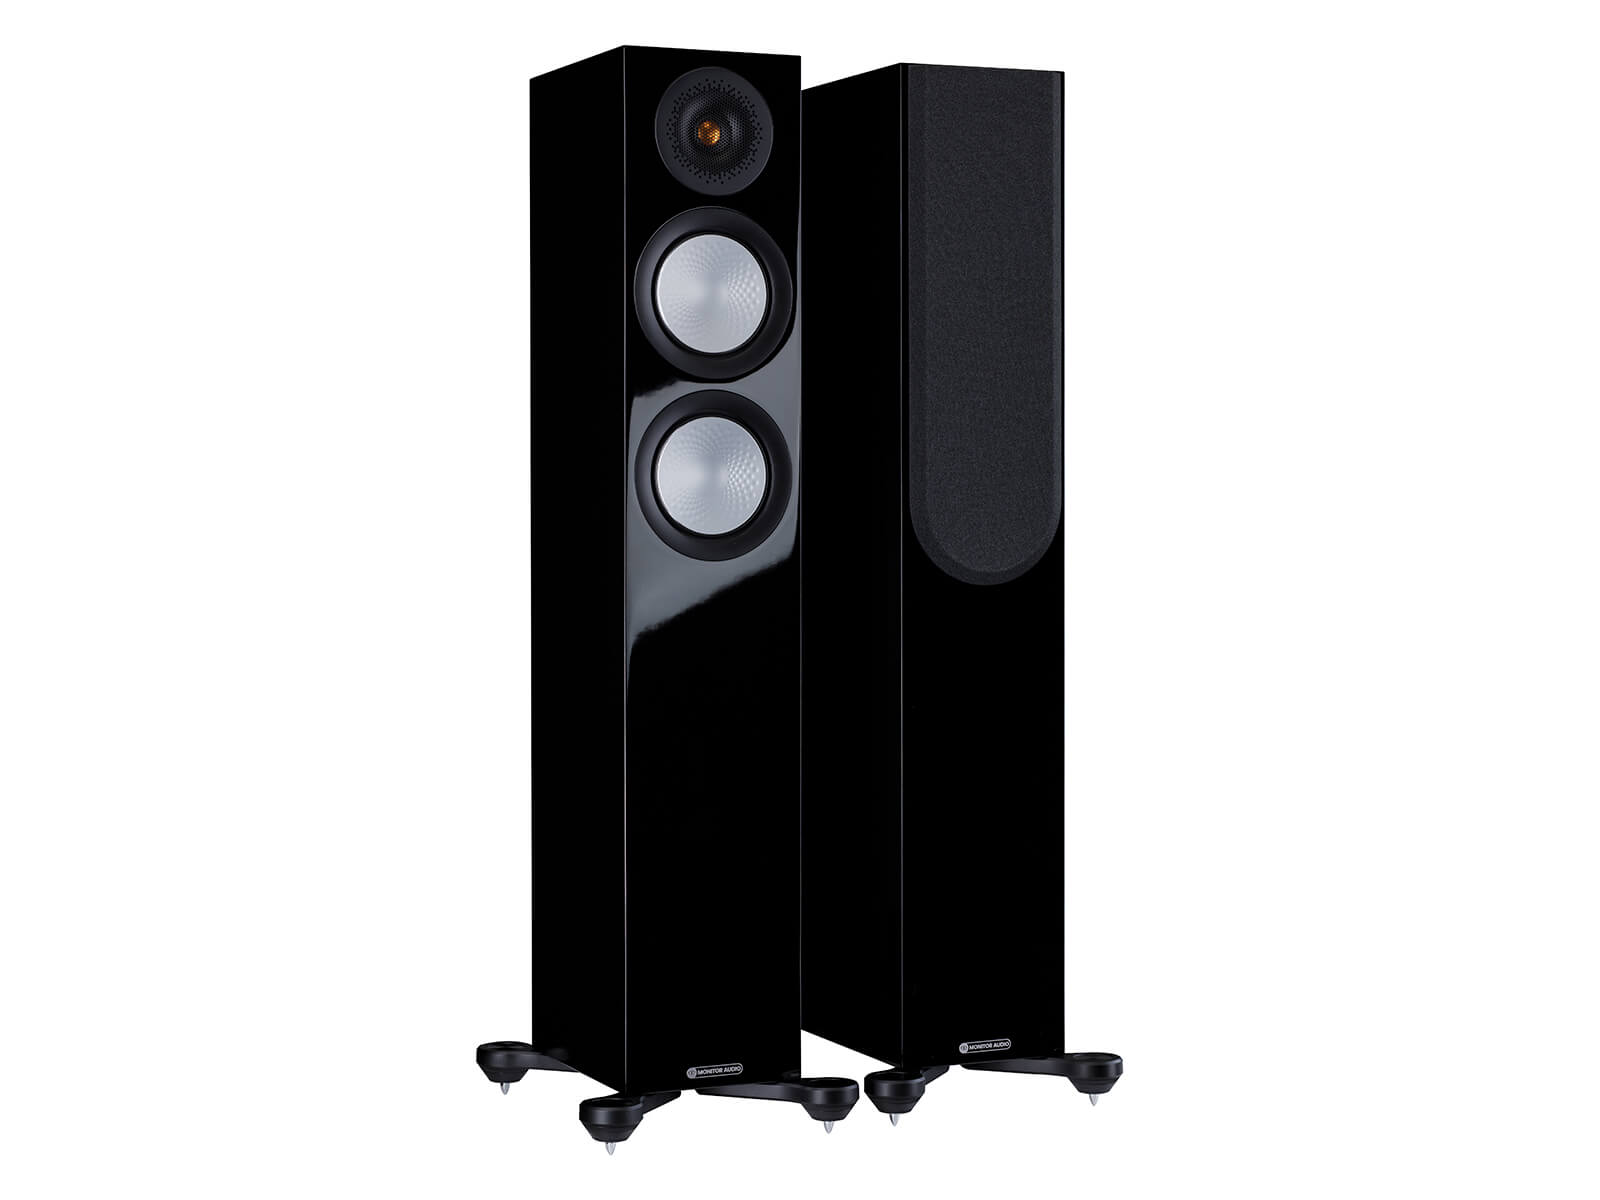 A pair of Monitor Audio's Silver 200 7G, in a high gloss black finish, iso view, with and without grilles.